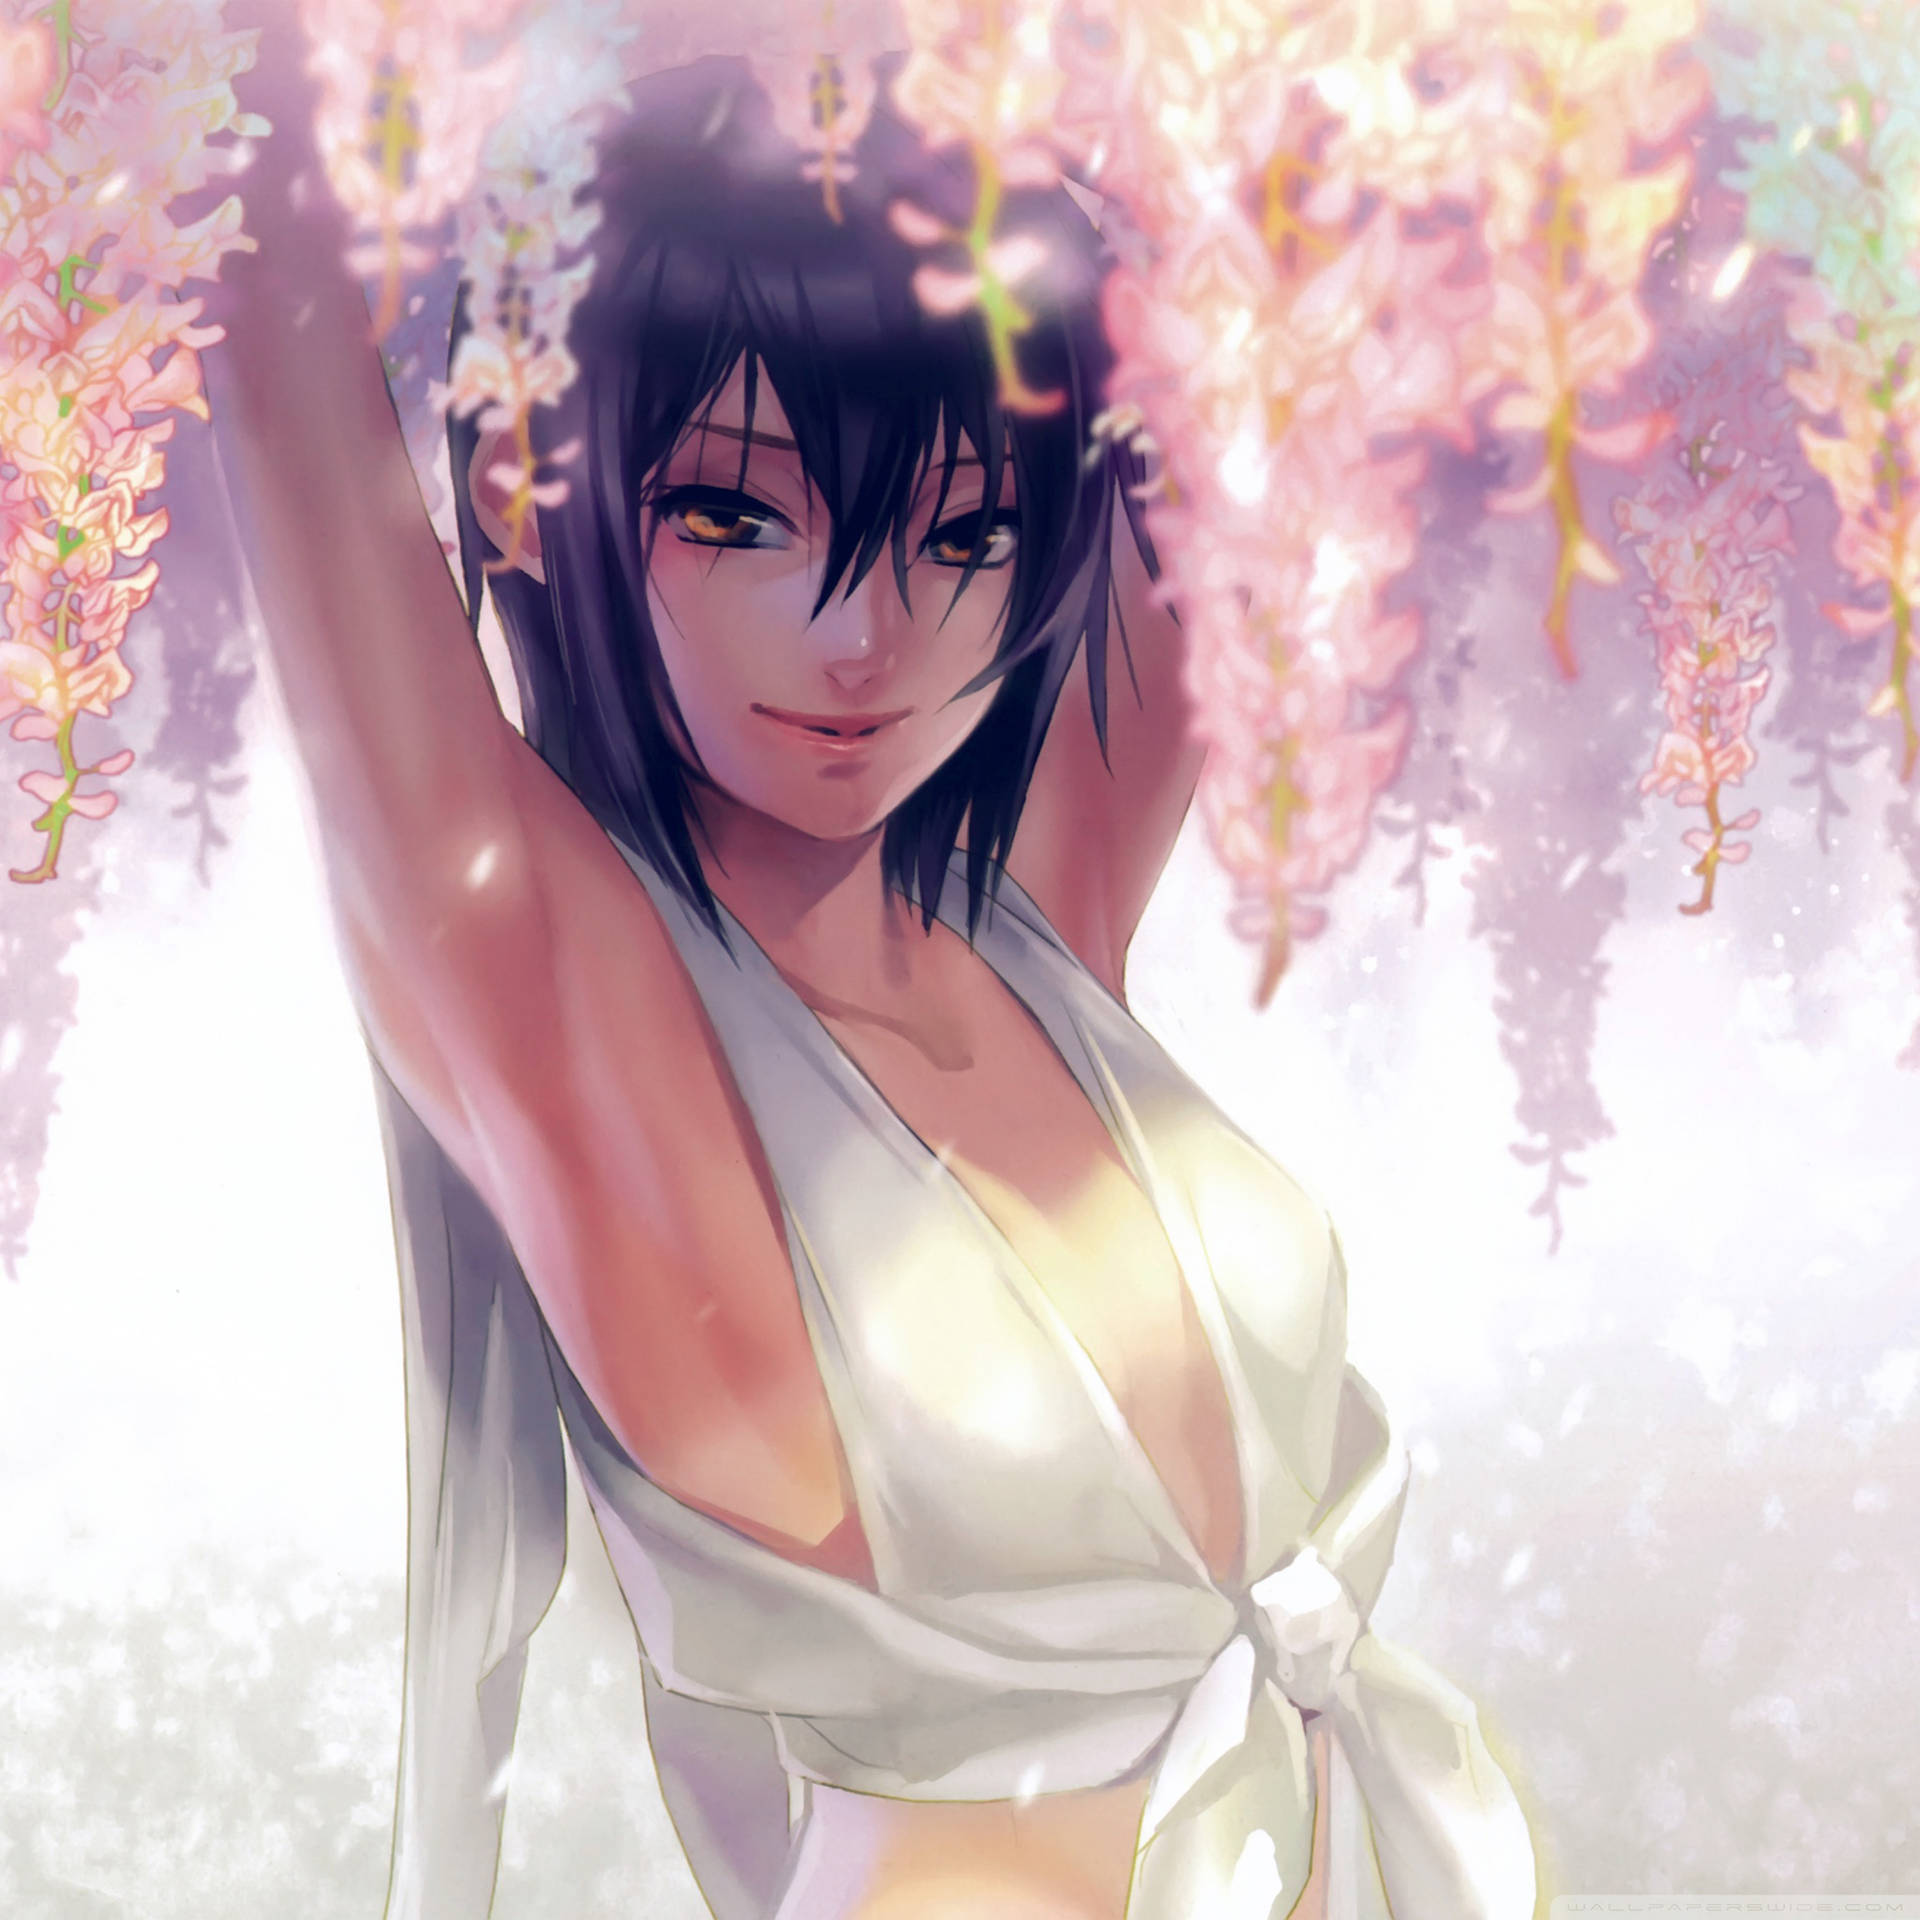 Sexy Anime Girl With Flowers Wallpaper